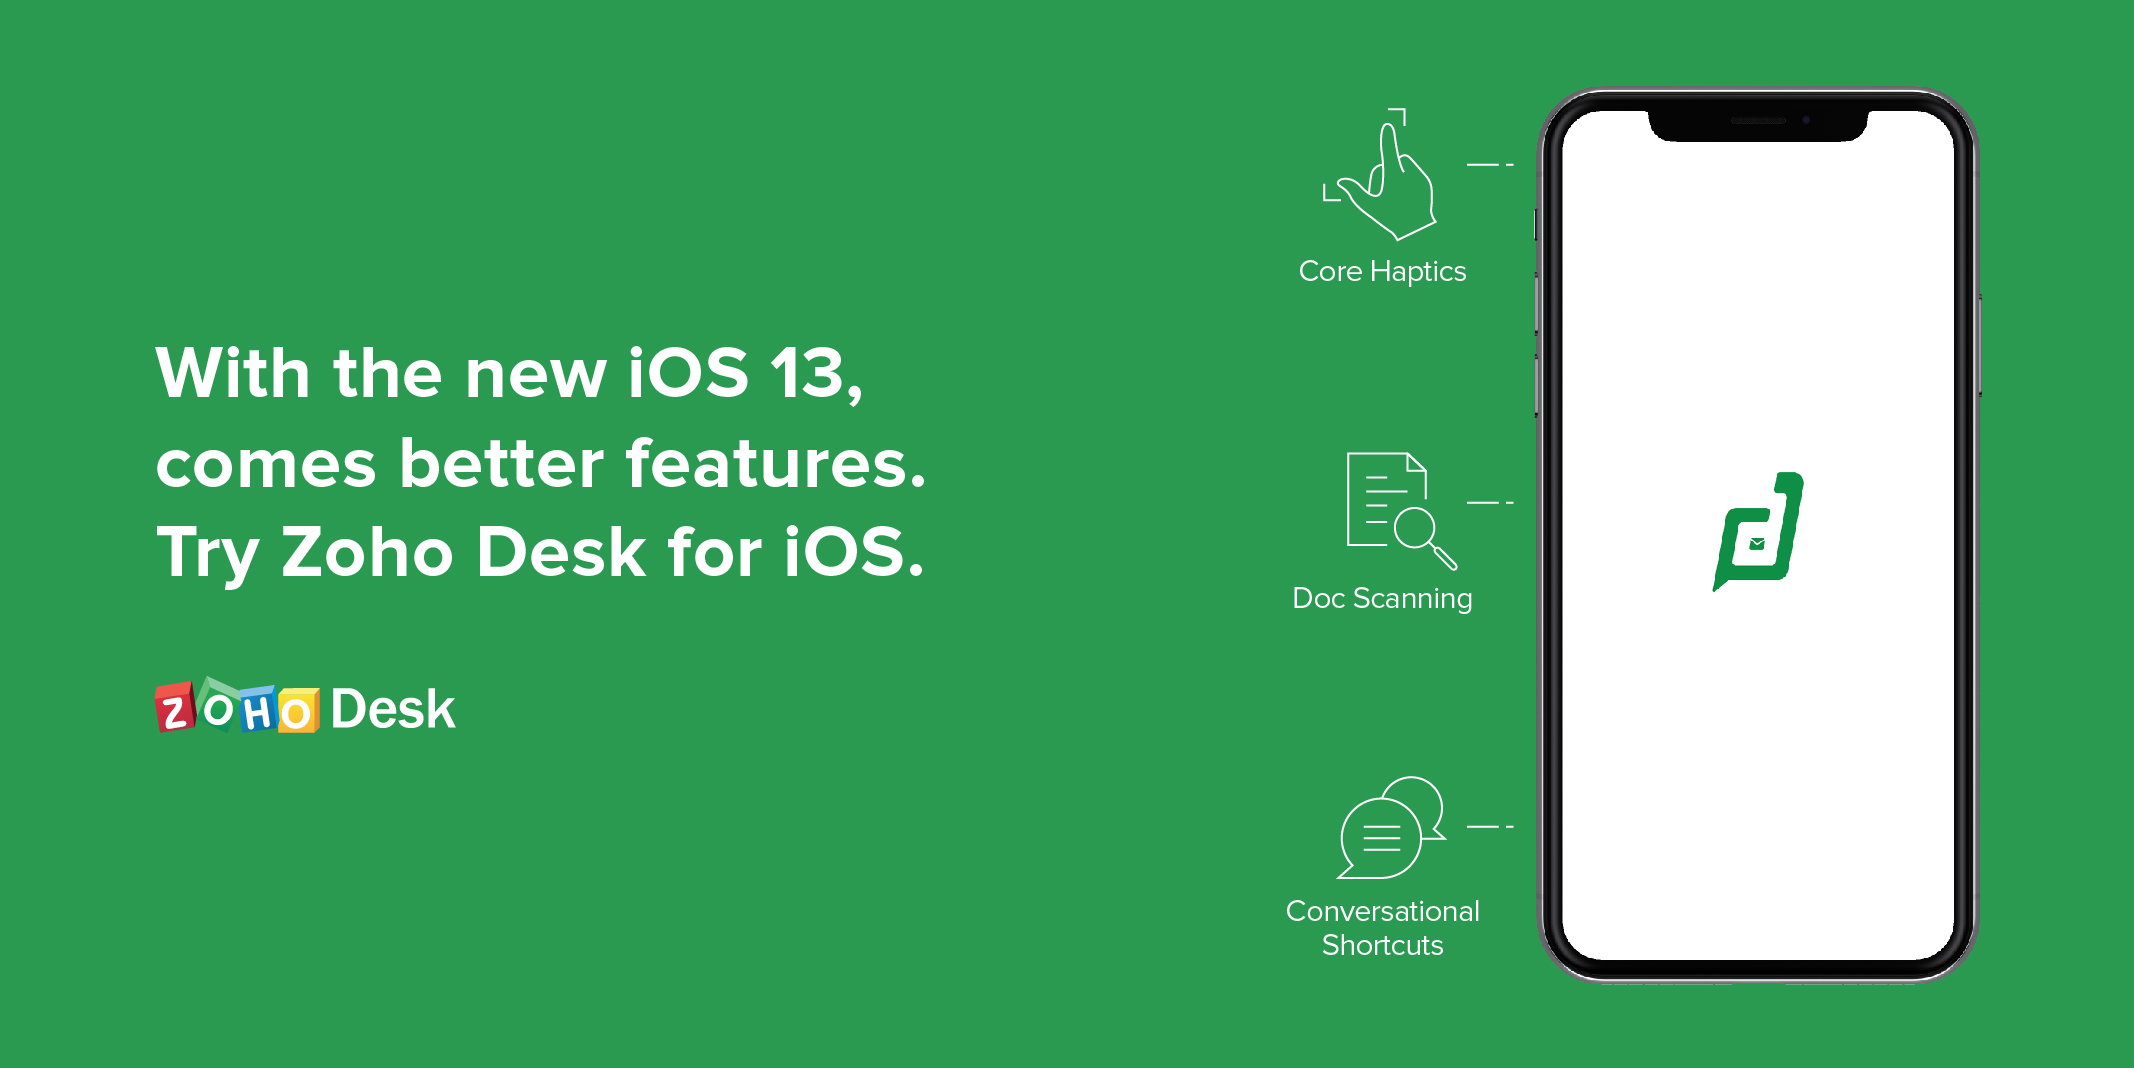 A better way of providing quality customer service with iOS 13